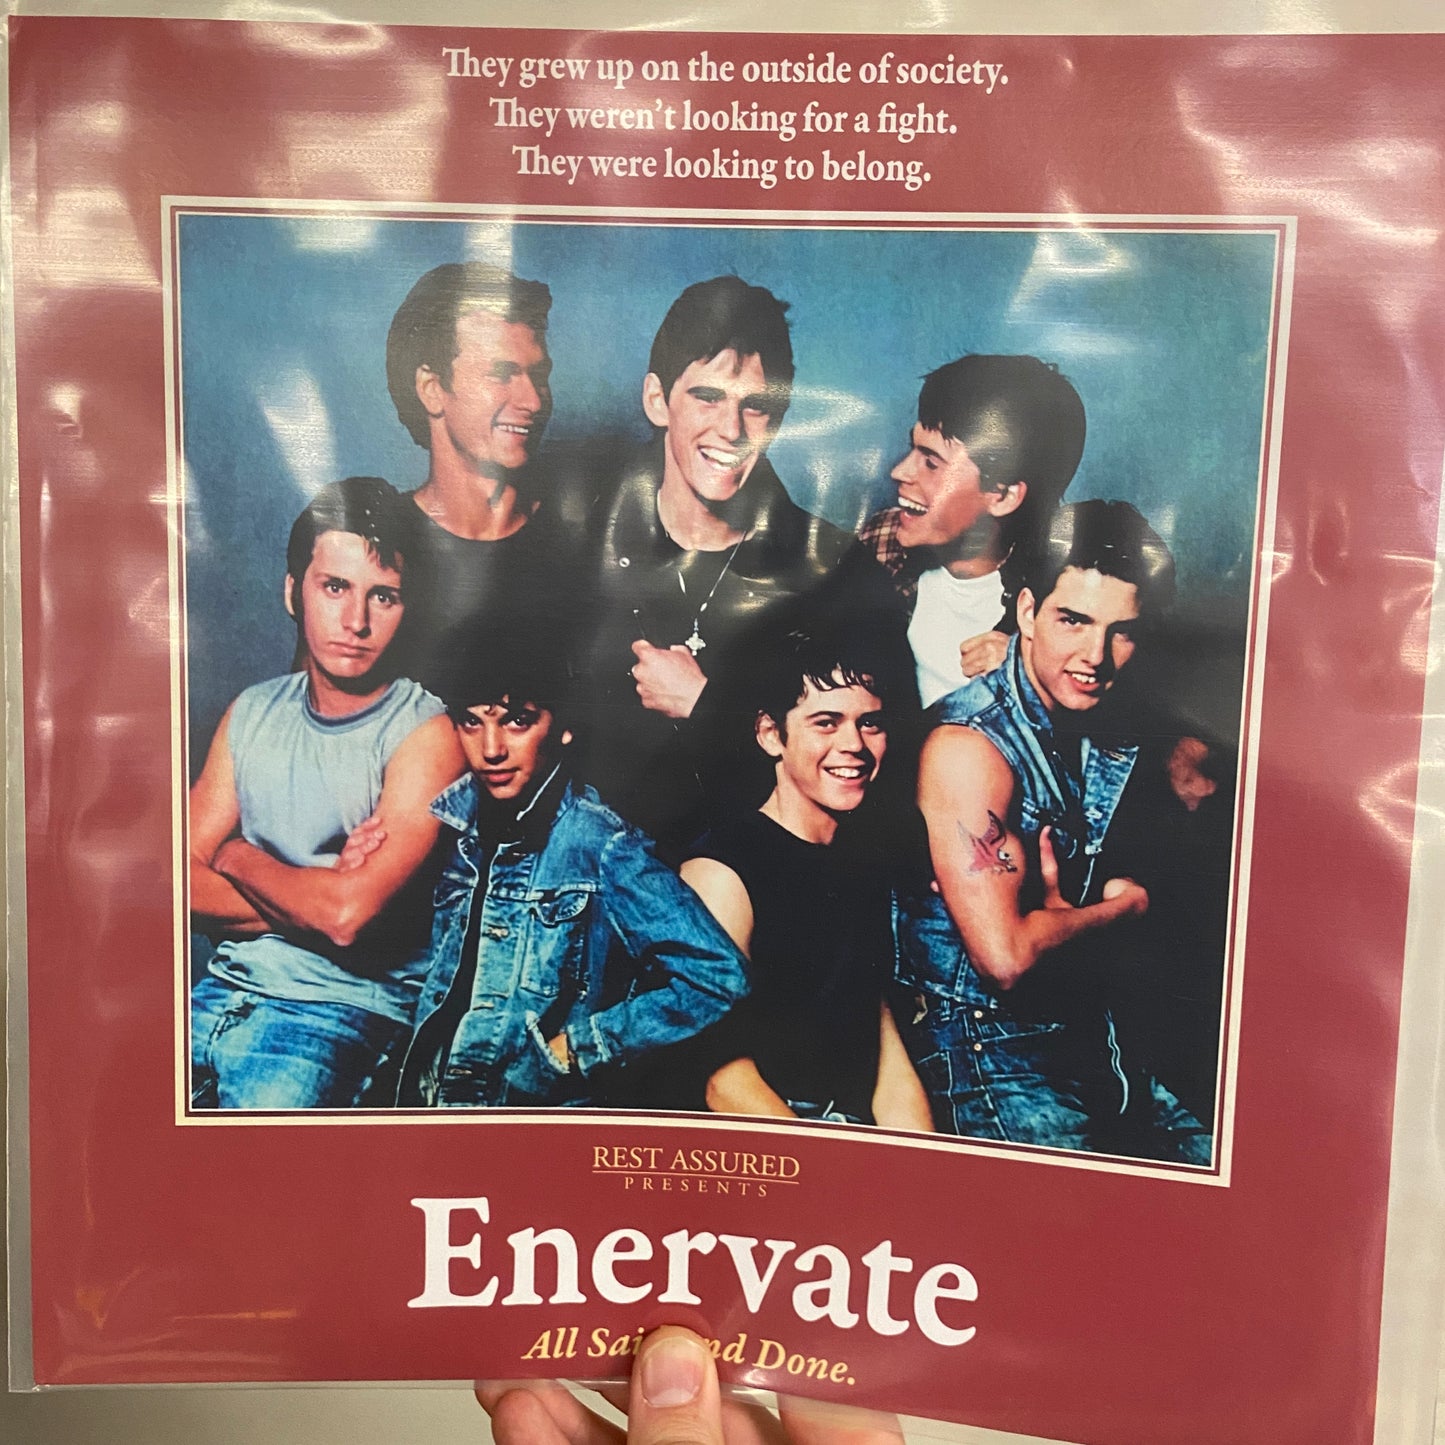 Enervate - 'All Said and Done'